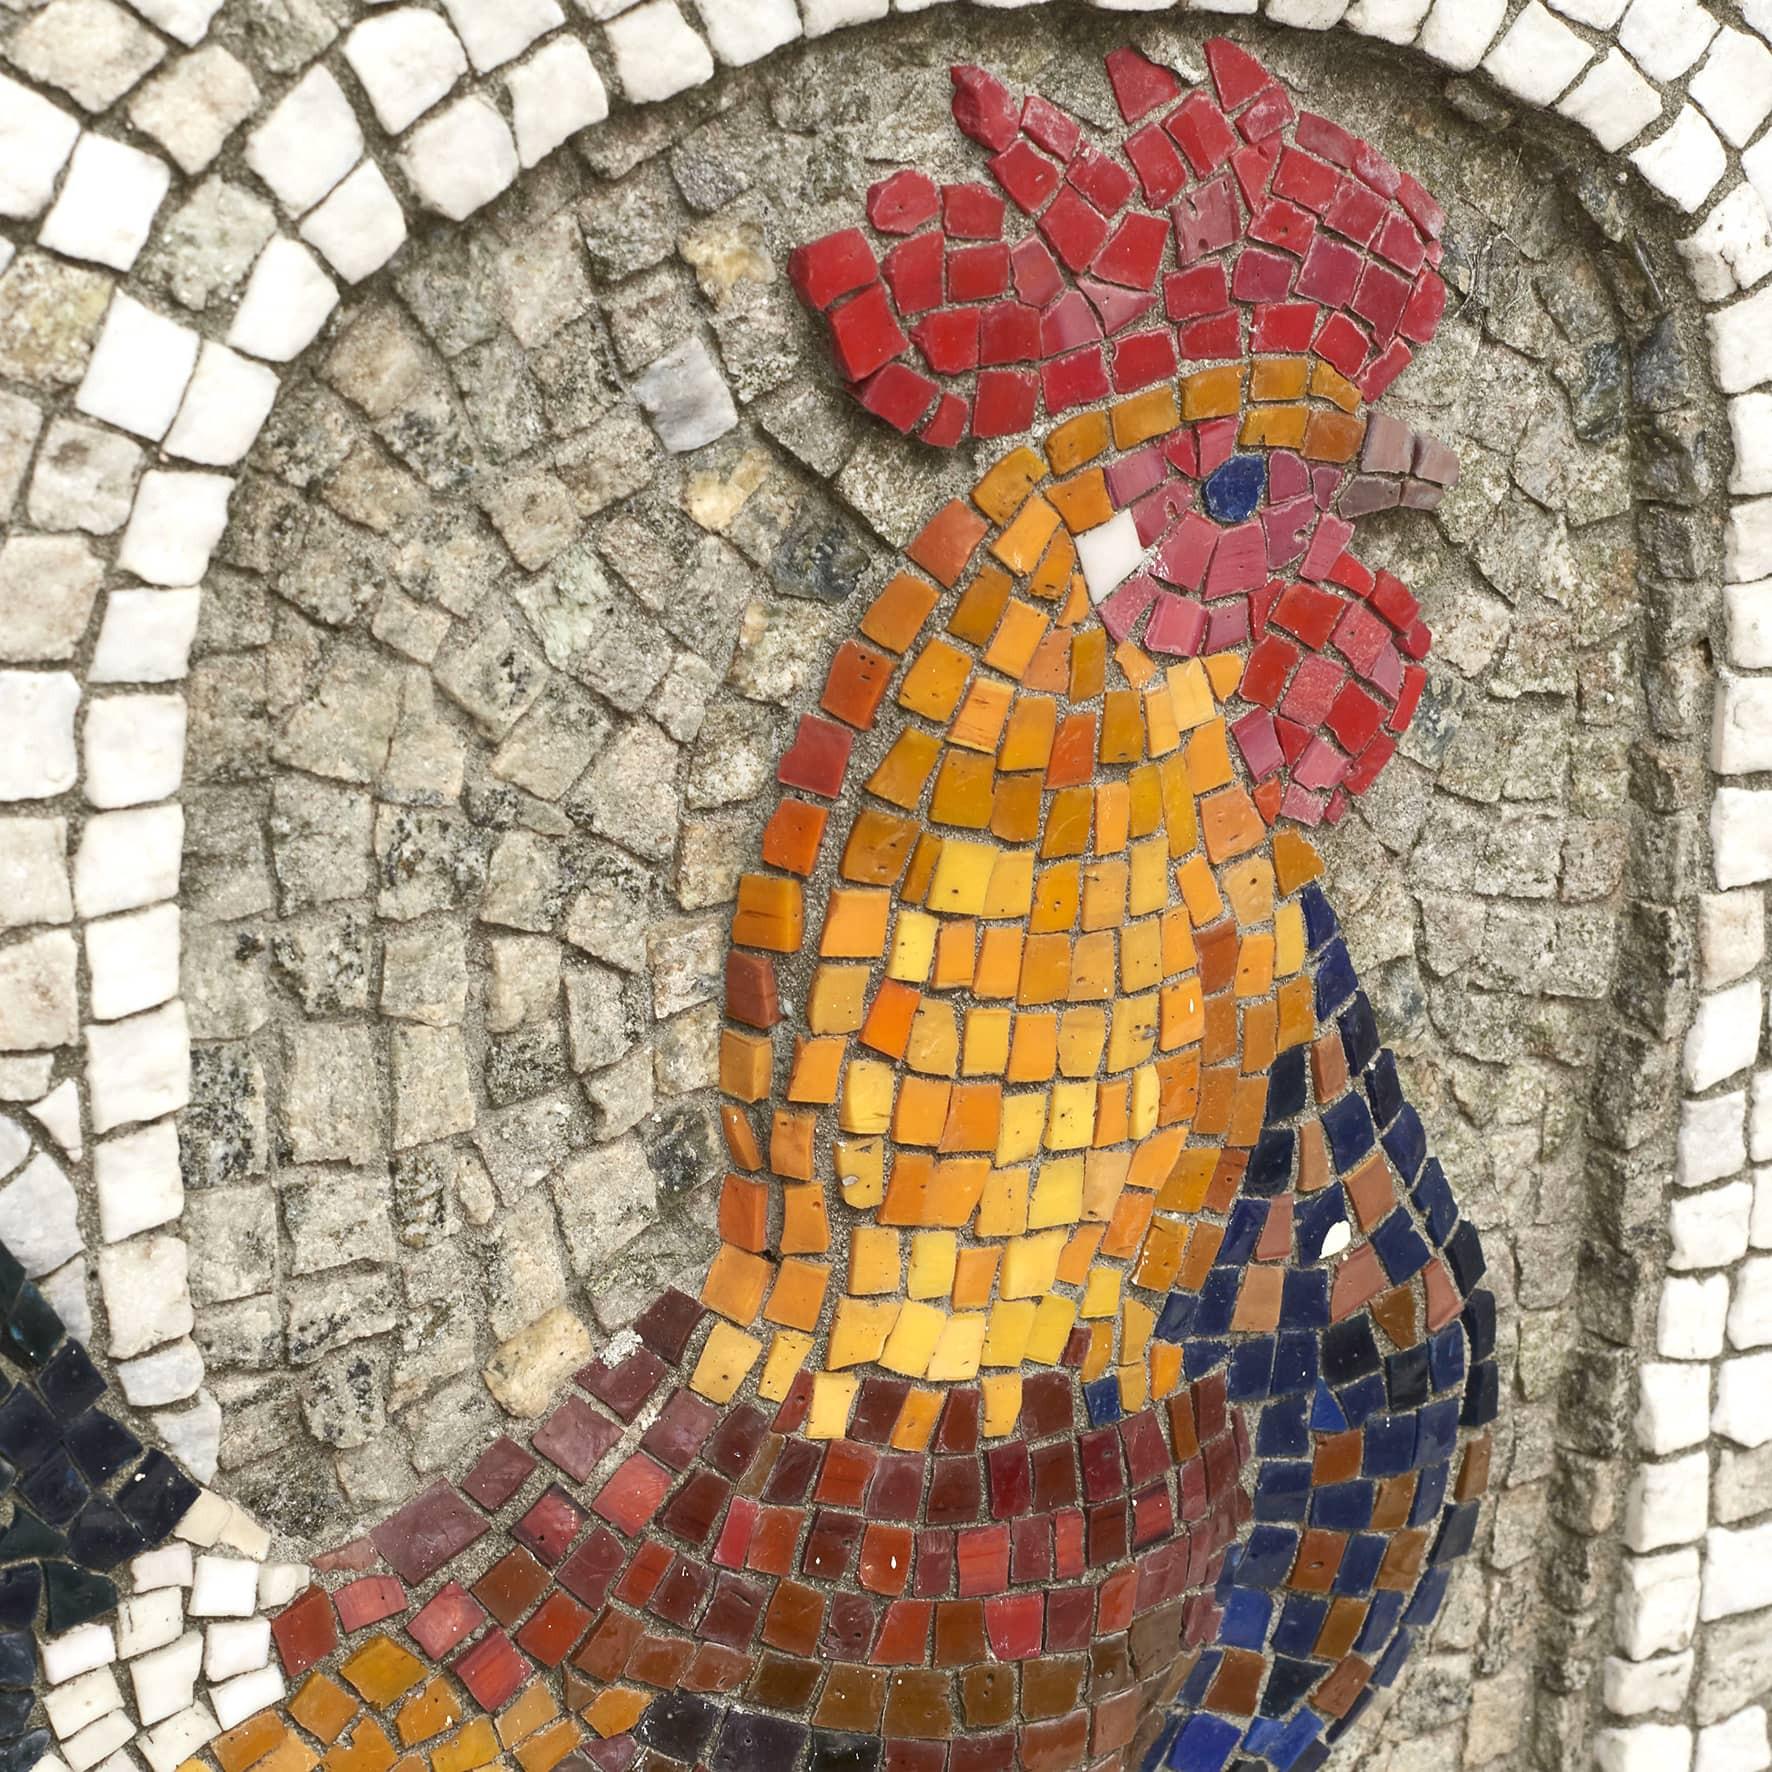 Gudrun Lauesen 1917 - 2002.
Decorative artwork set in stone mosaic with a scene of a rooster and chickens.
Different colored stones applied to cement.
Signed Monogram LG

Material stone cement Polychrome stone.